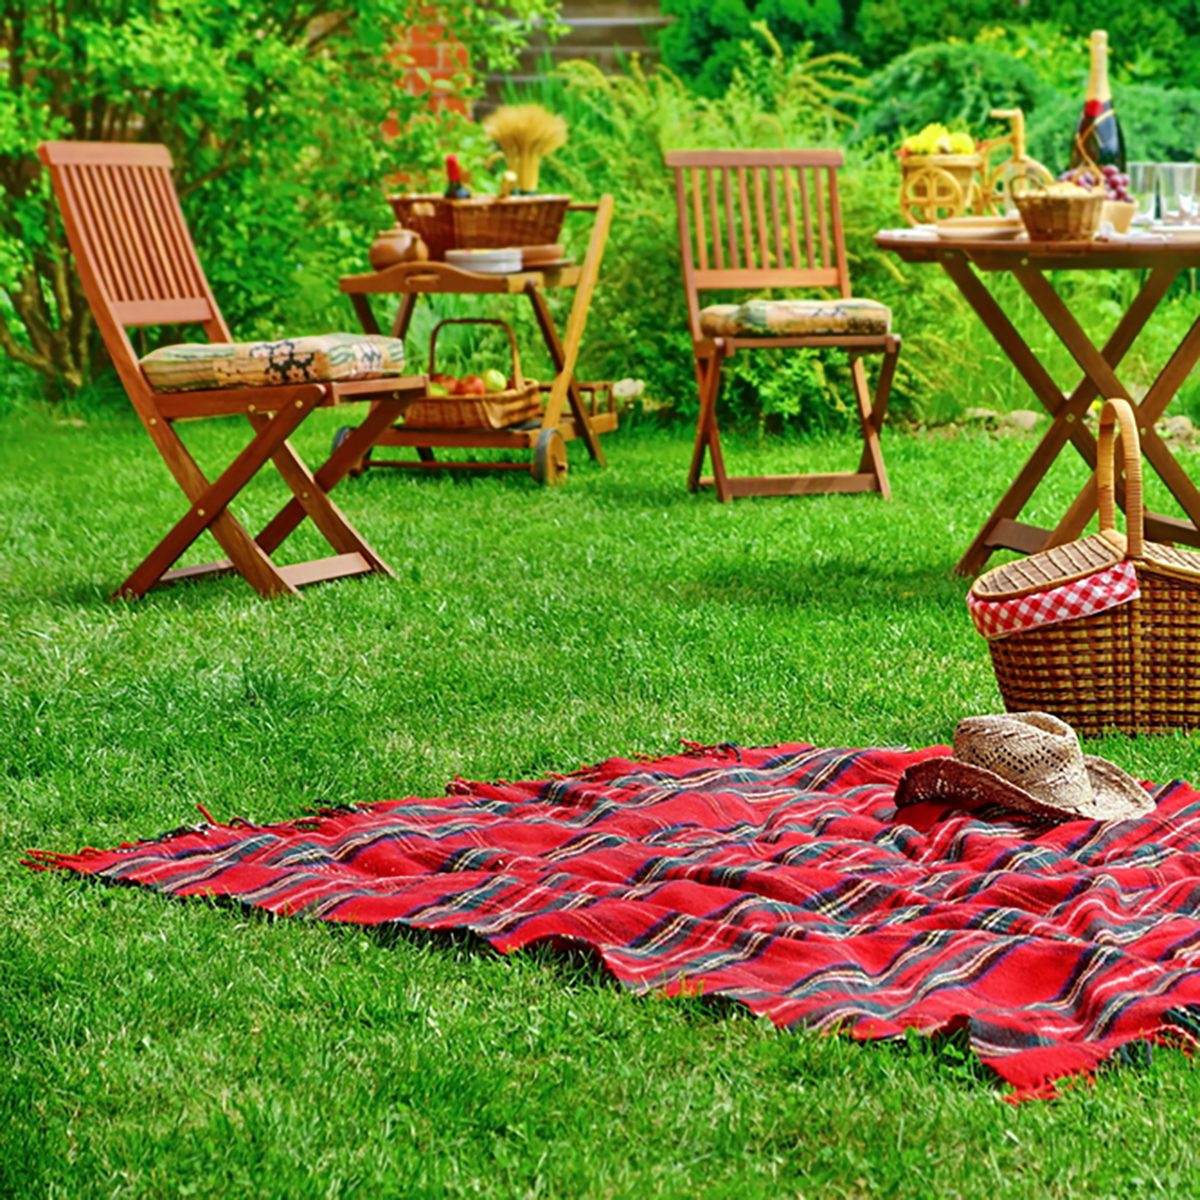 Closeup Of Red Picnic Blanket With Cowboy Straw Hat And Basket Or Hamper